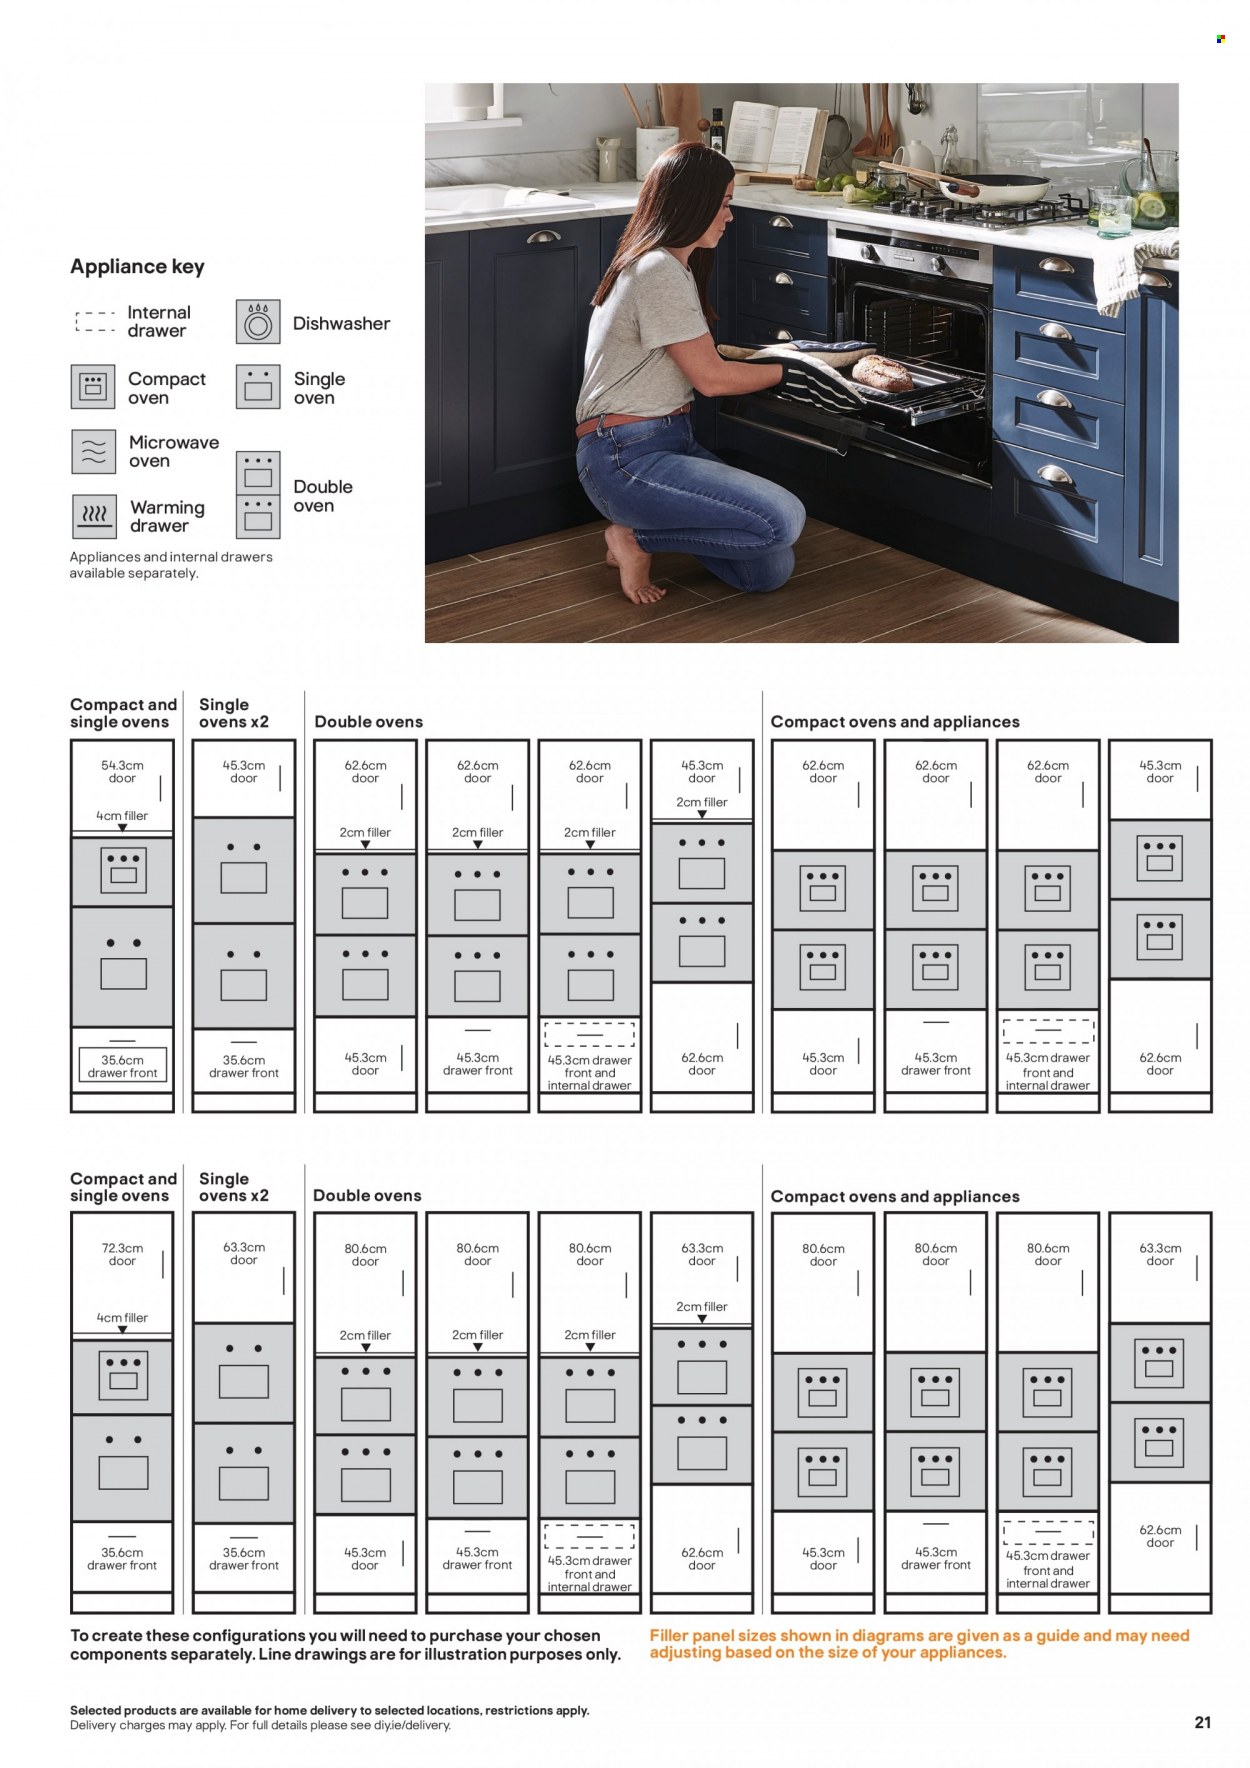 B&Q offer  - Sales products - drawer fronts. Page 21.